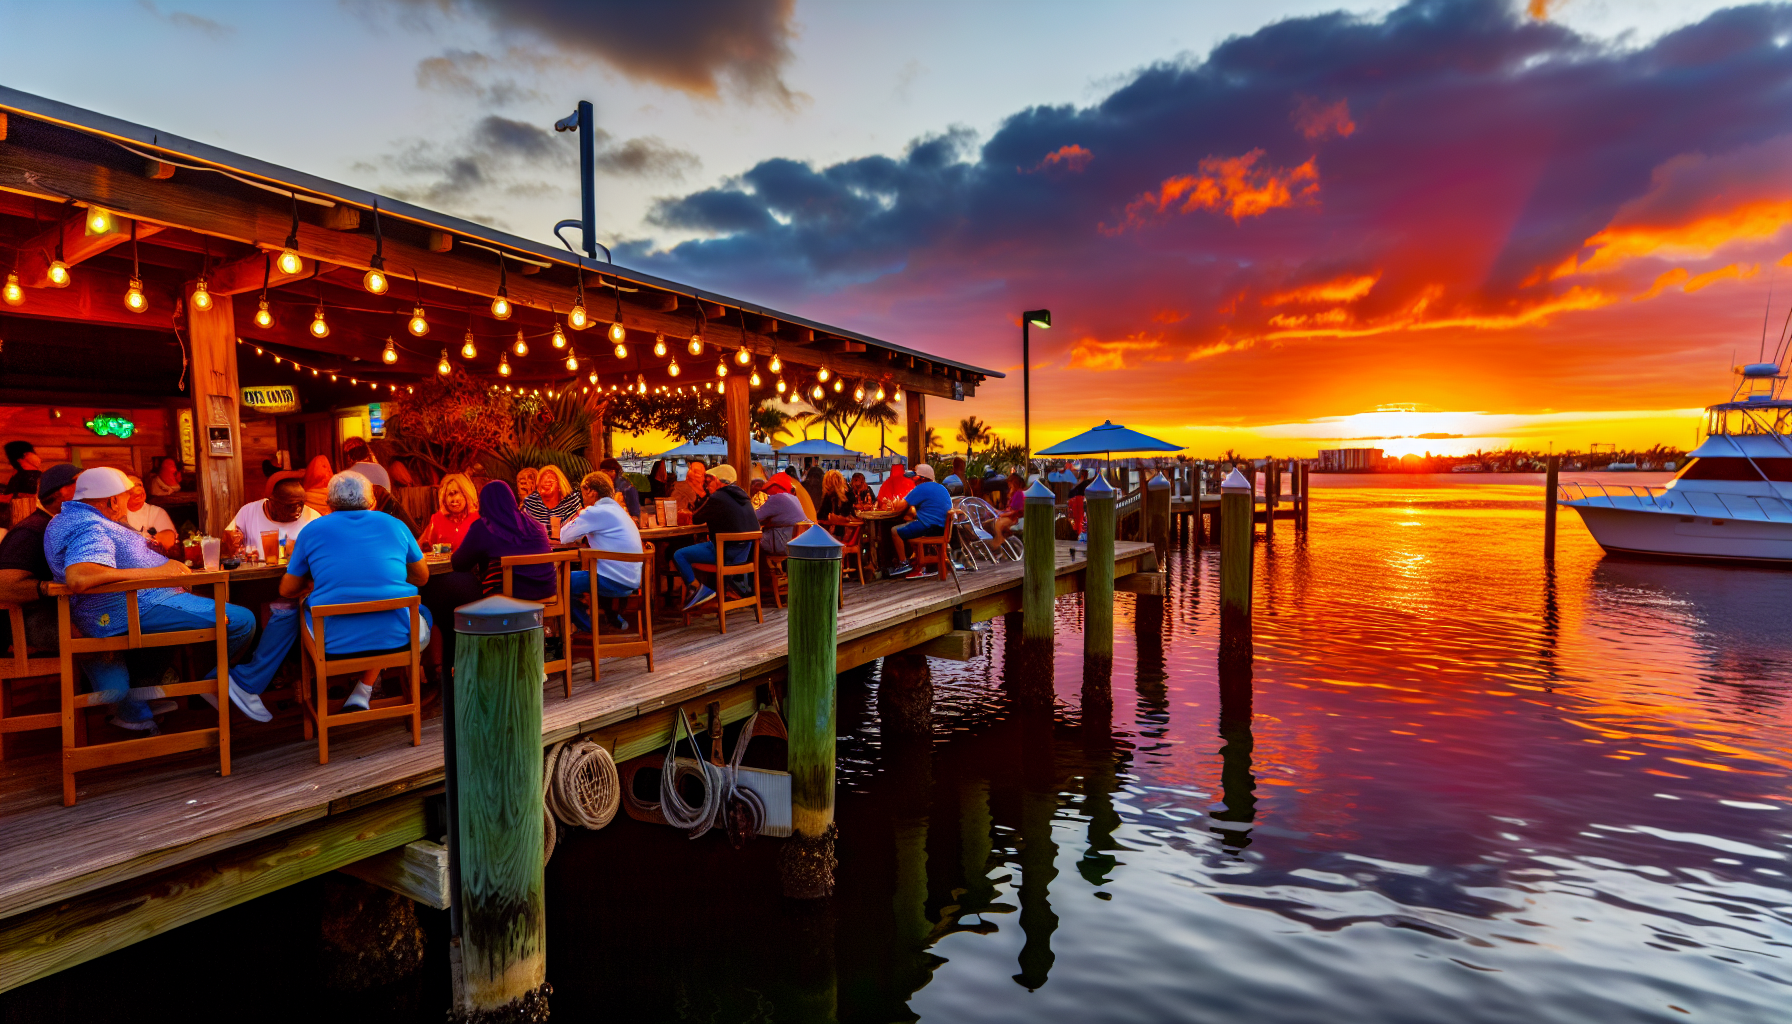 A scenic view of the sunset over the waterfront at a Fort Lauderdale oyster spot